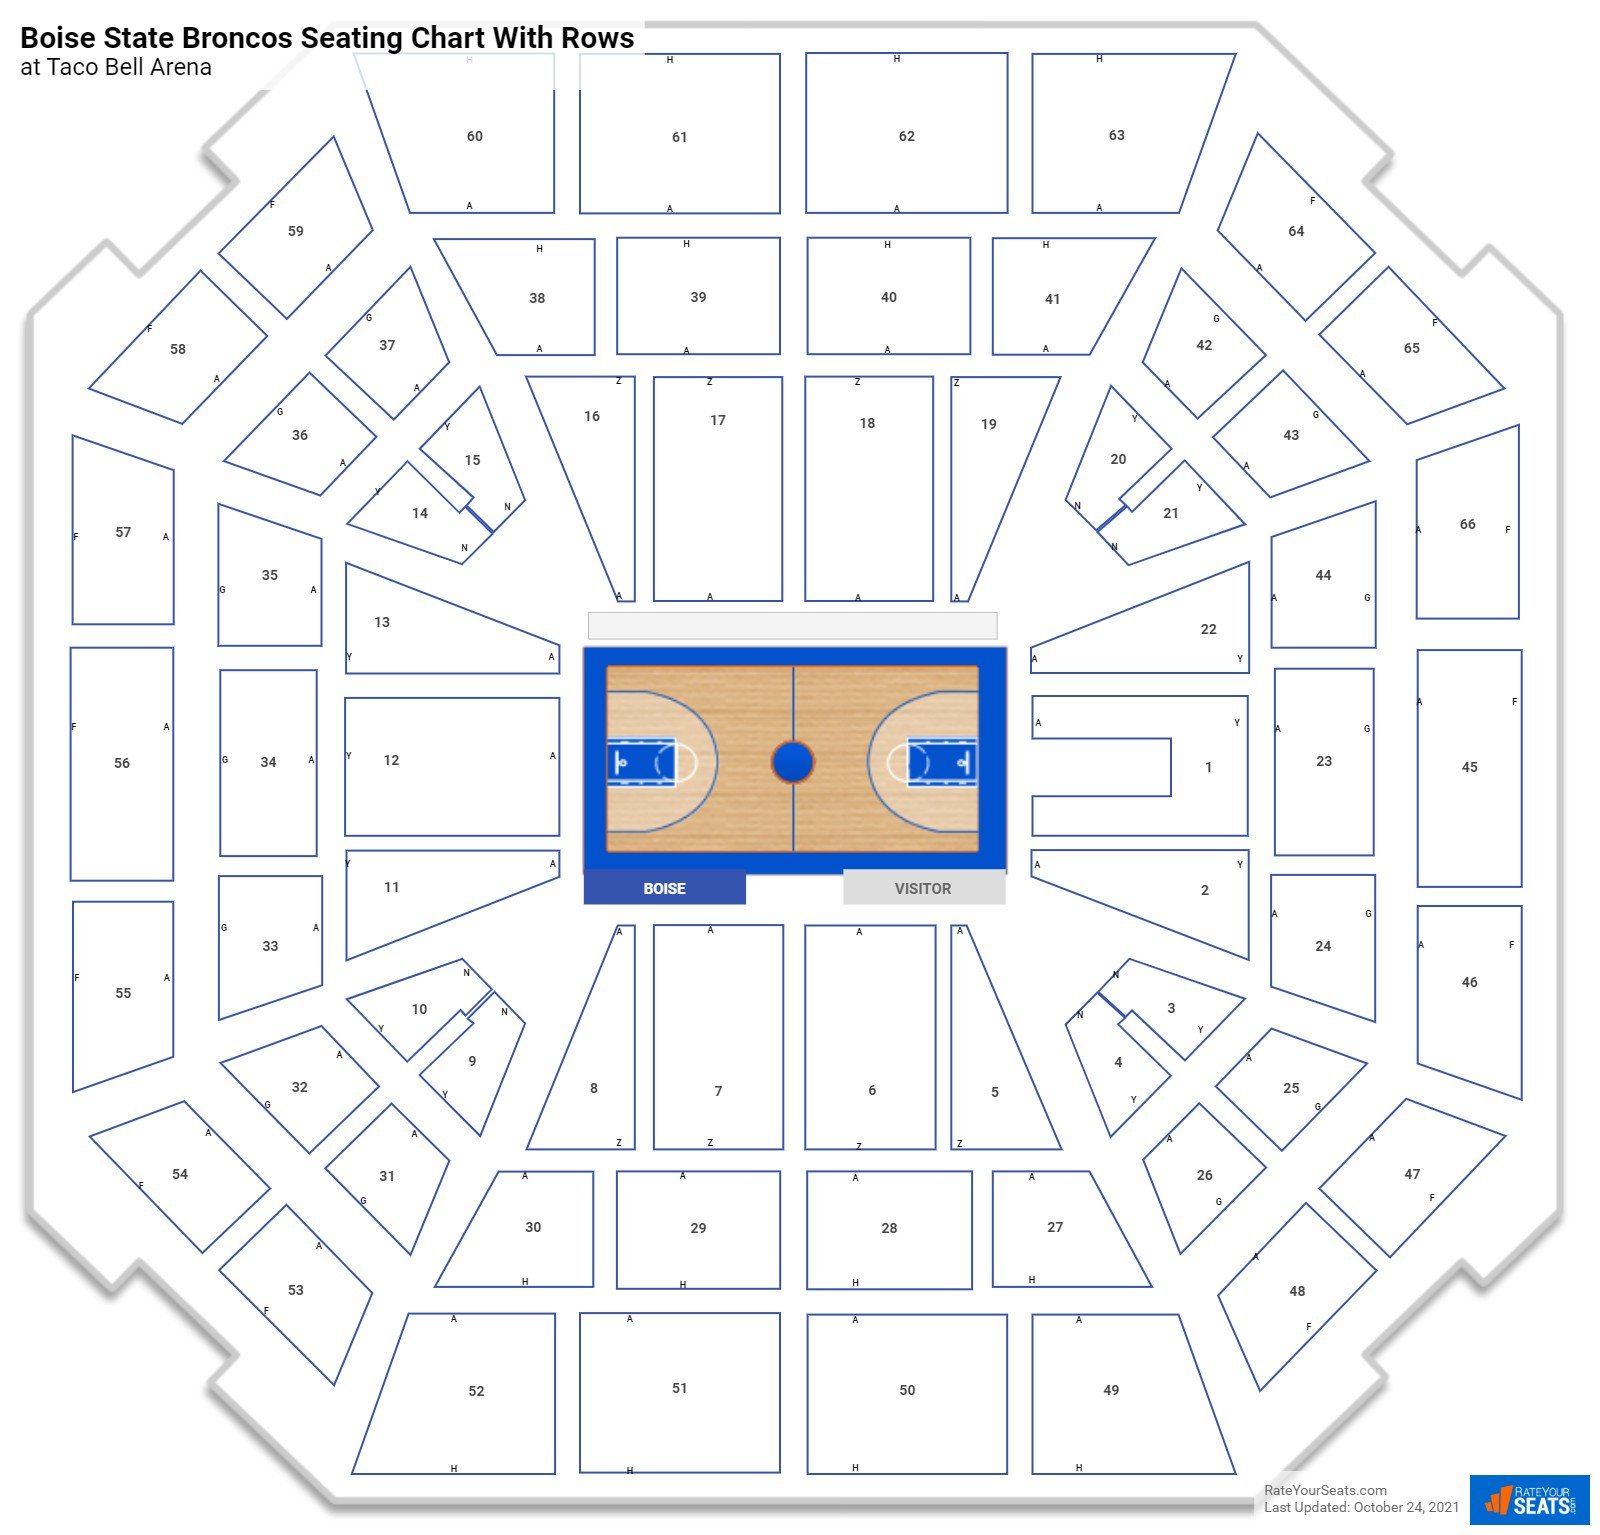 ExtraMile Arena seating chart with row numbers